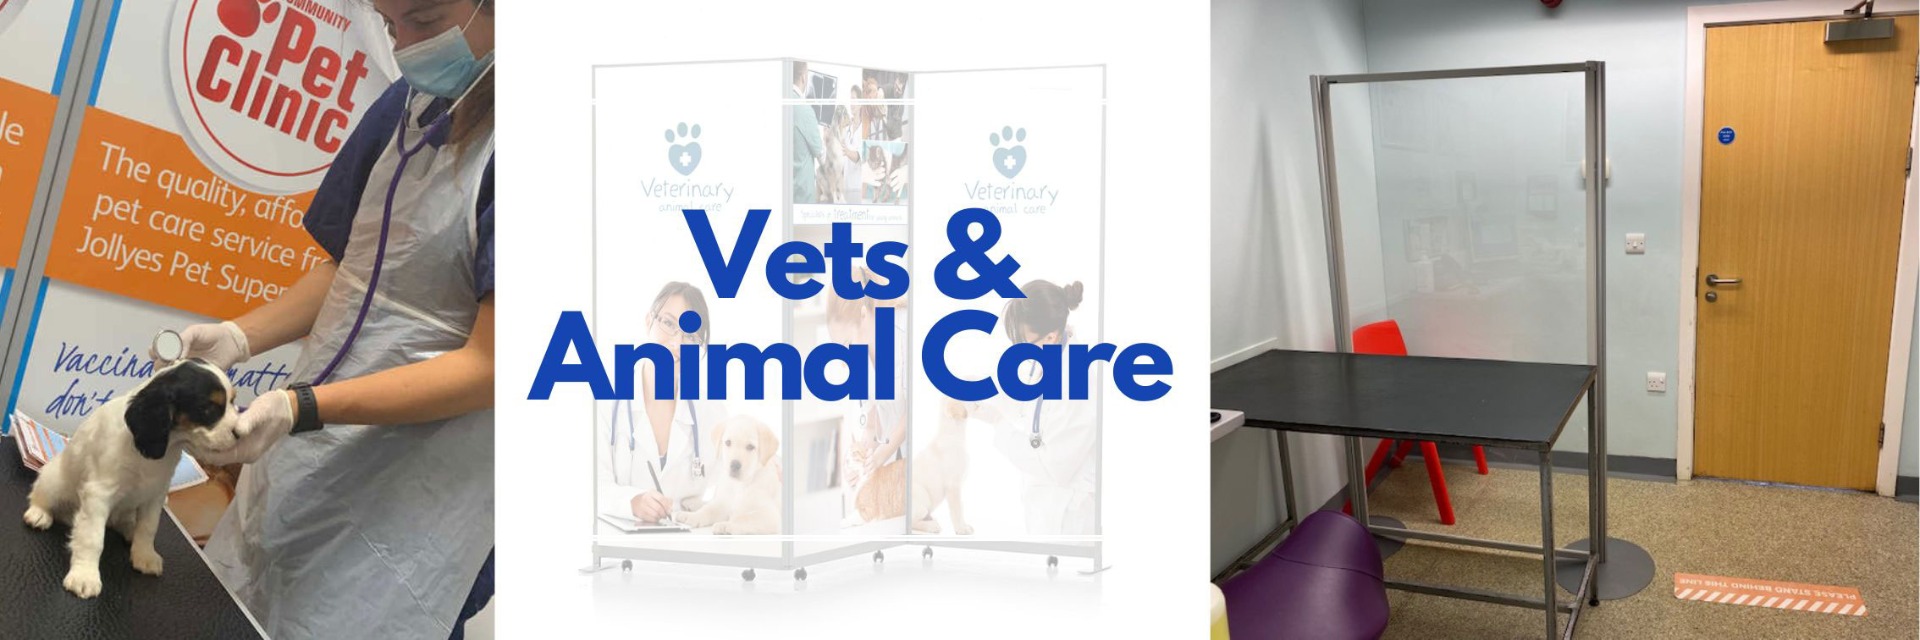 Animal care & Vet Partition Screens